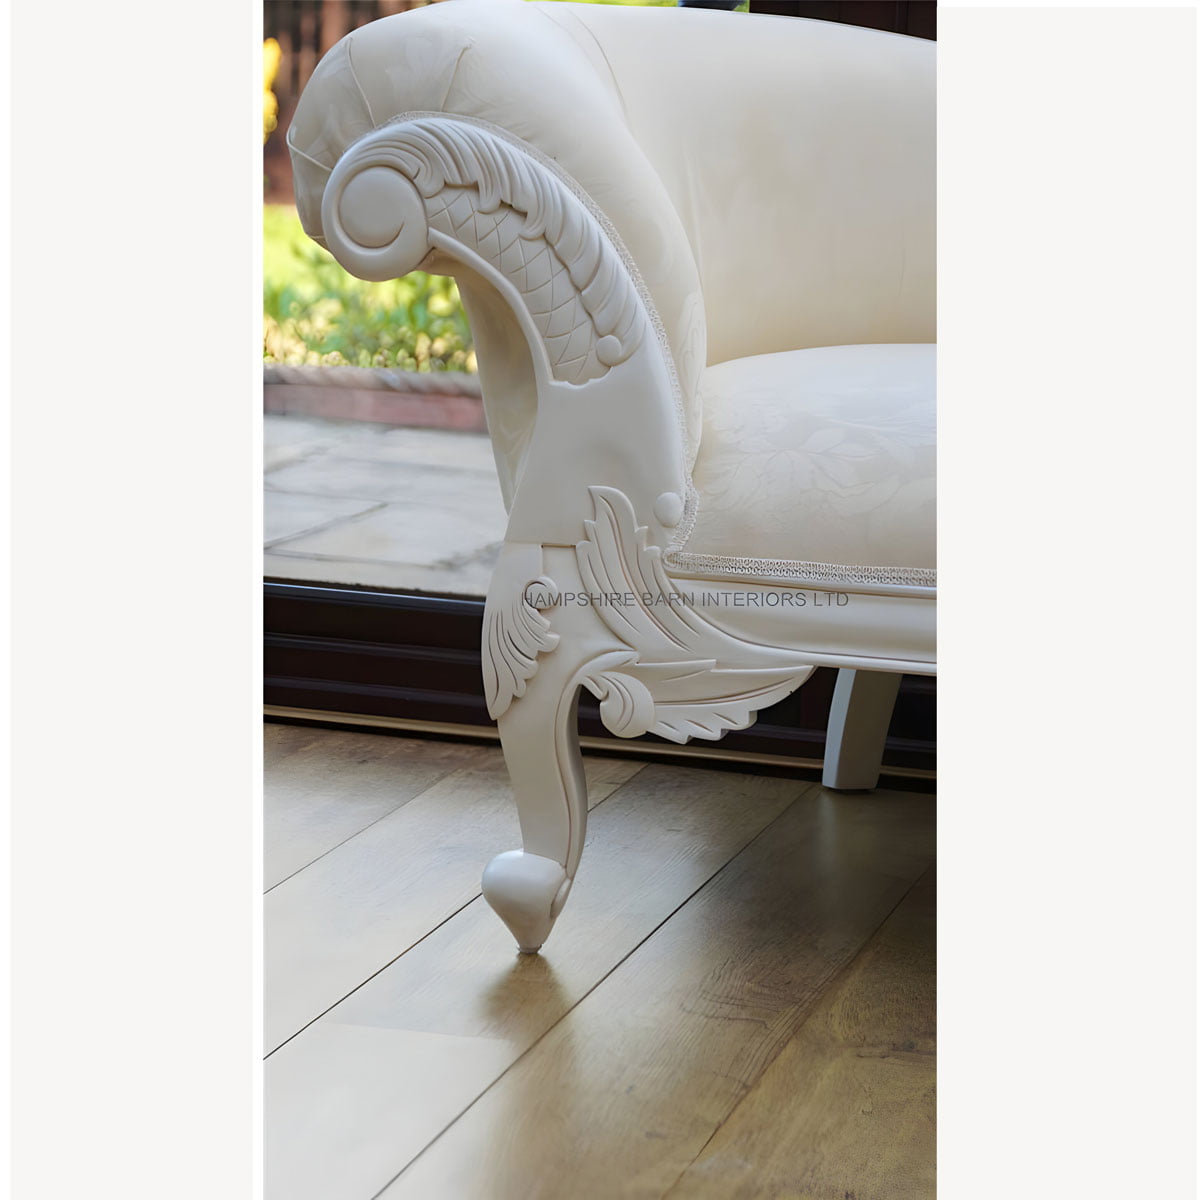 Antique White Ornate Medium Hampshire Chaise With Ivory Cream Fabric With Crystal Buttoning 3 - Hampshire Barn Interiors - Antique White Ornate Medium Hampshire Chaise With Ivory Cream Fabric With Crystal Buttoning -